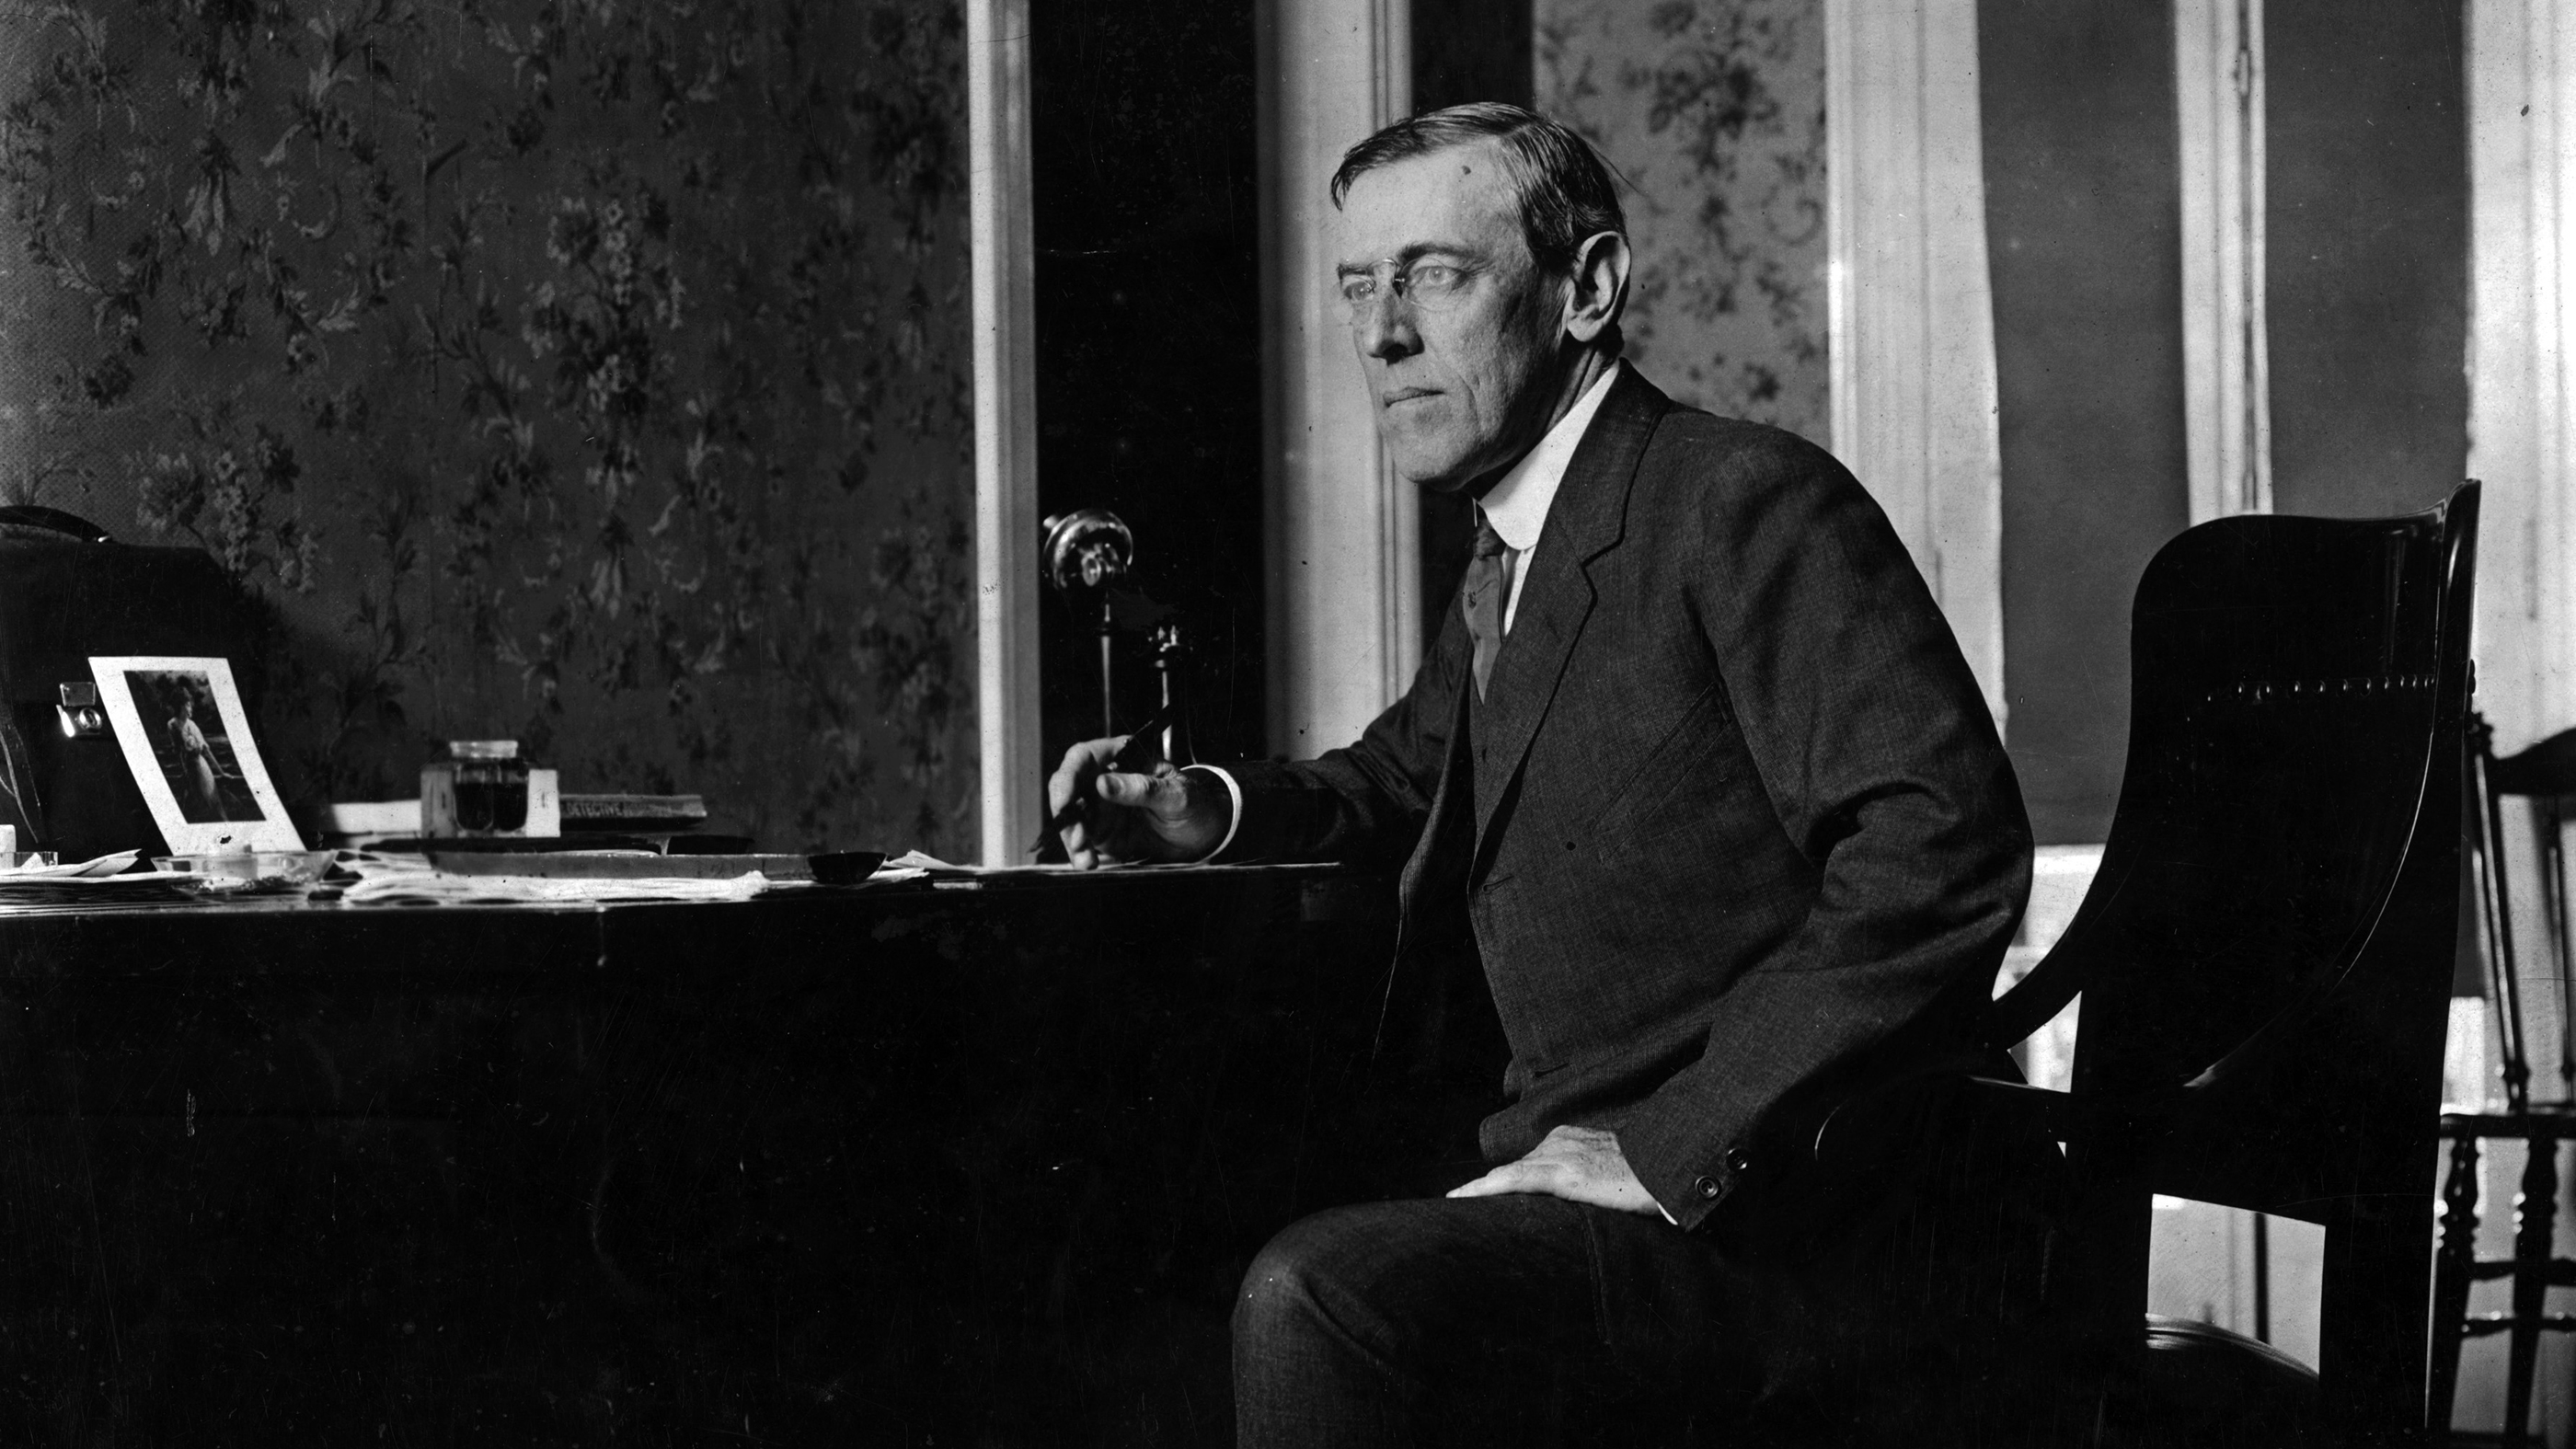 President Woodrow Wilson, shown here, signed the Standard Time Act in 1918, establishing U.S. time zones and daylight saving time, which would begin on March 31.